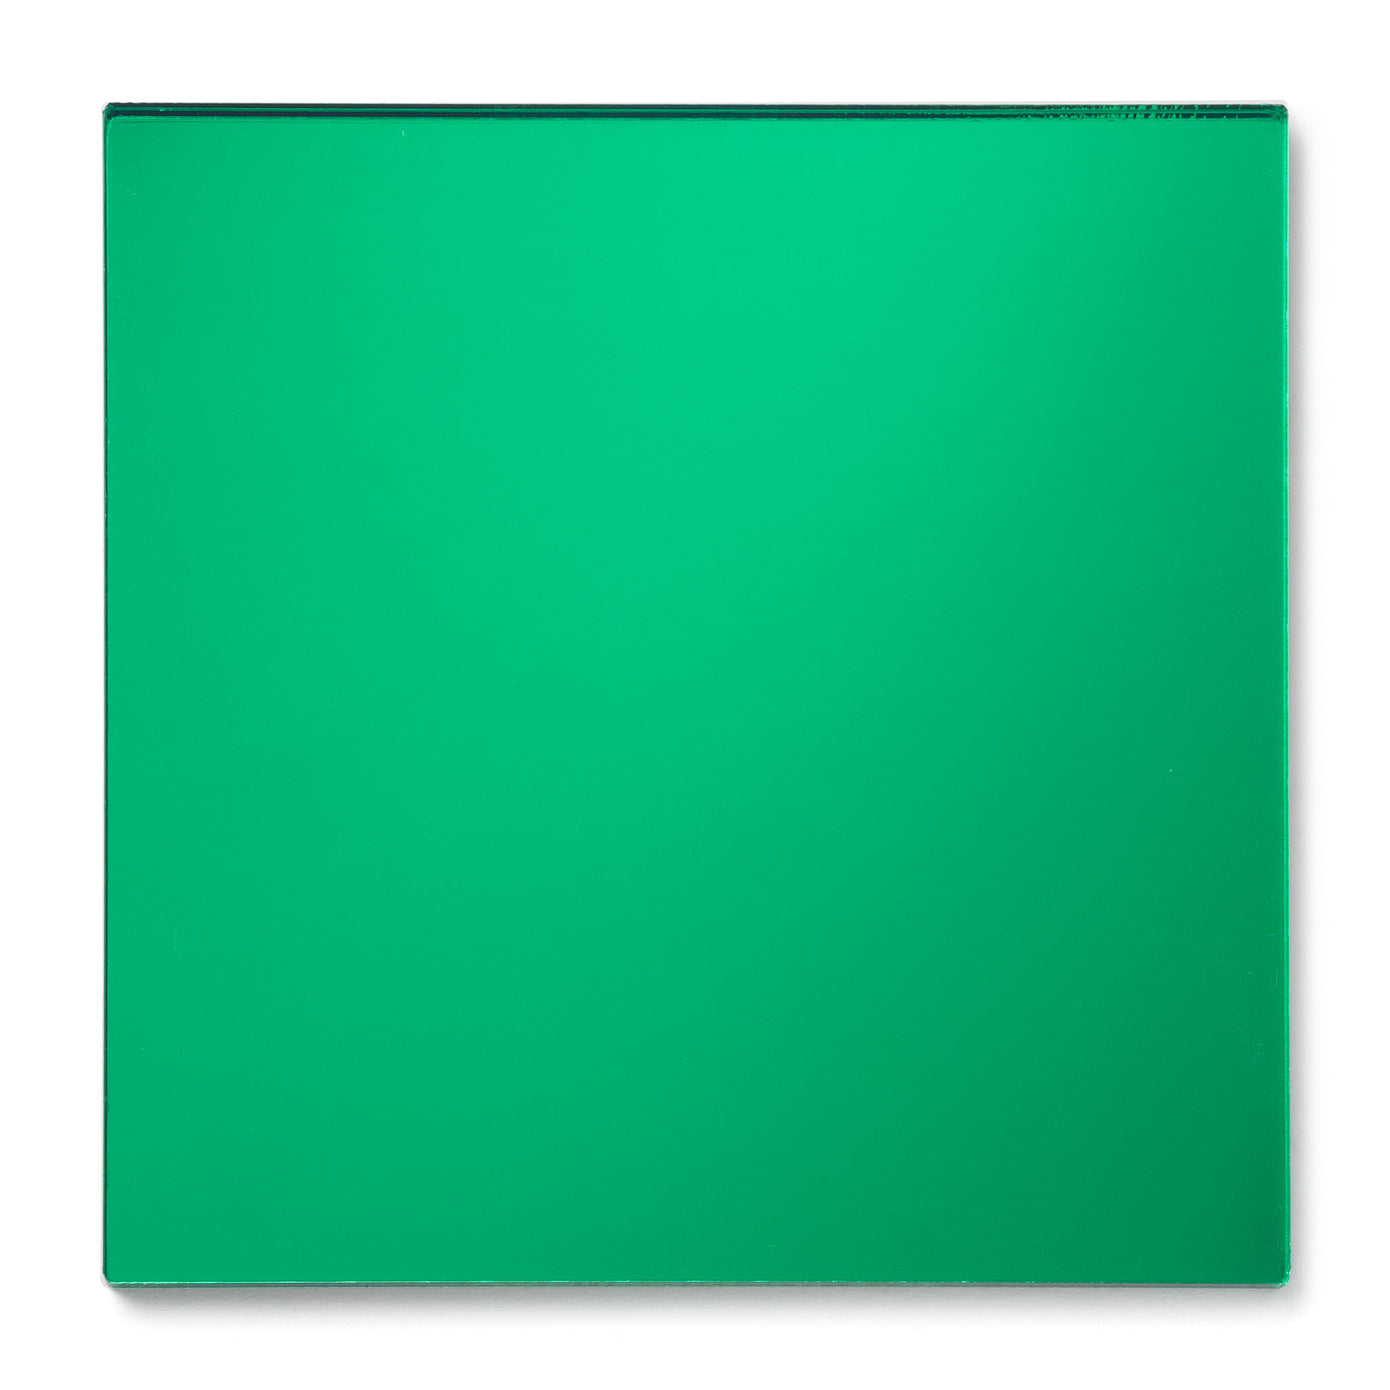 what color is a mirror green